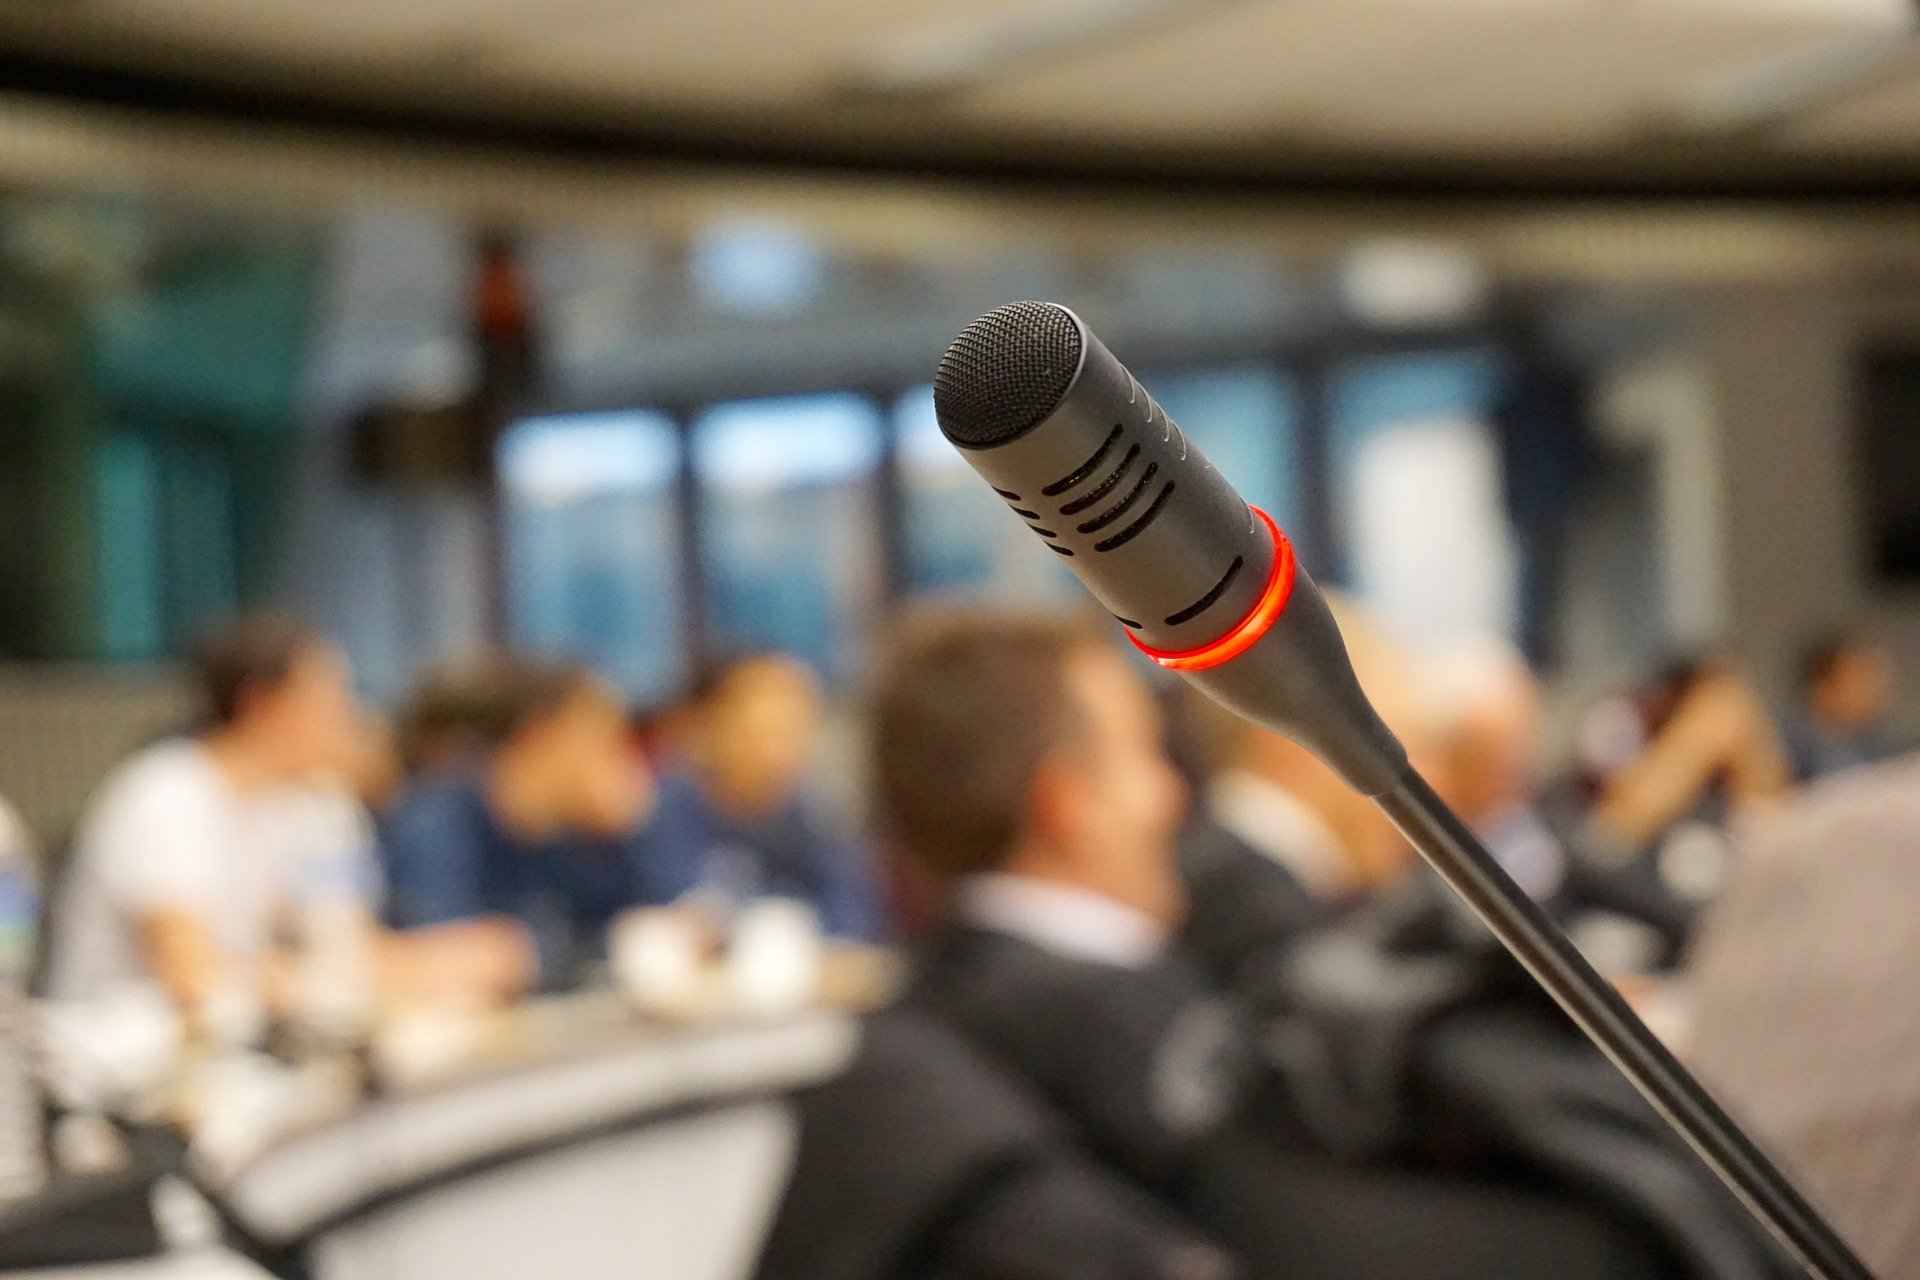 A microphone in a conference room filled with people